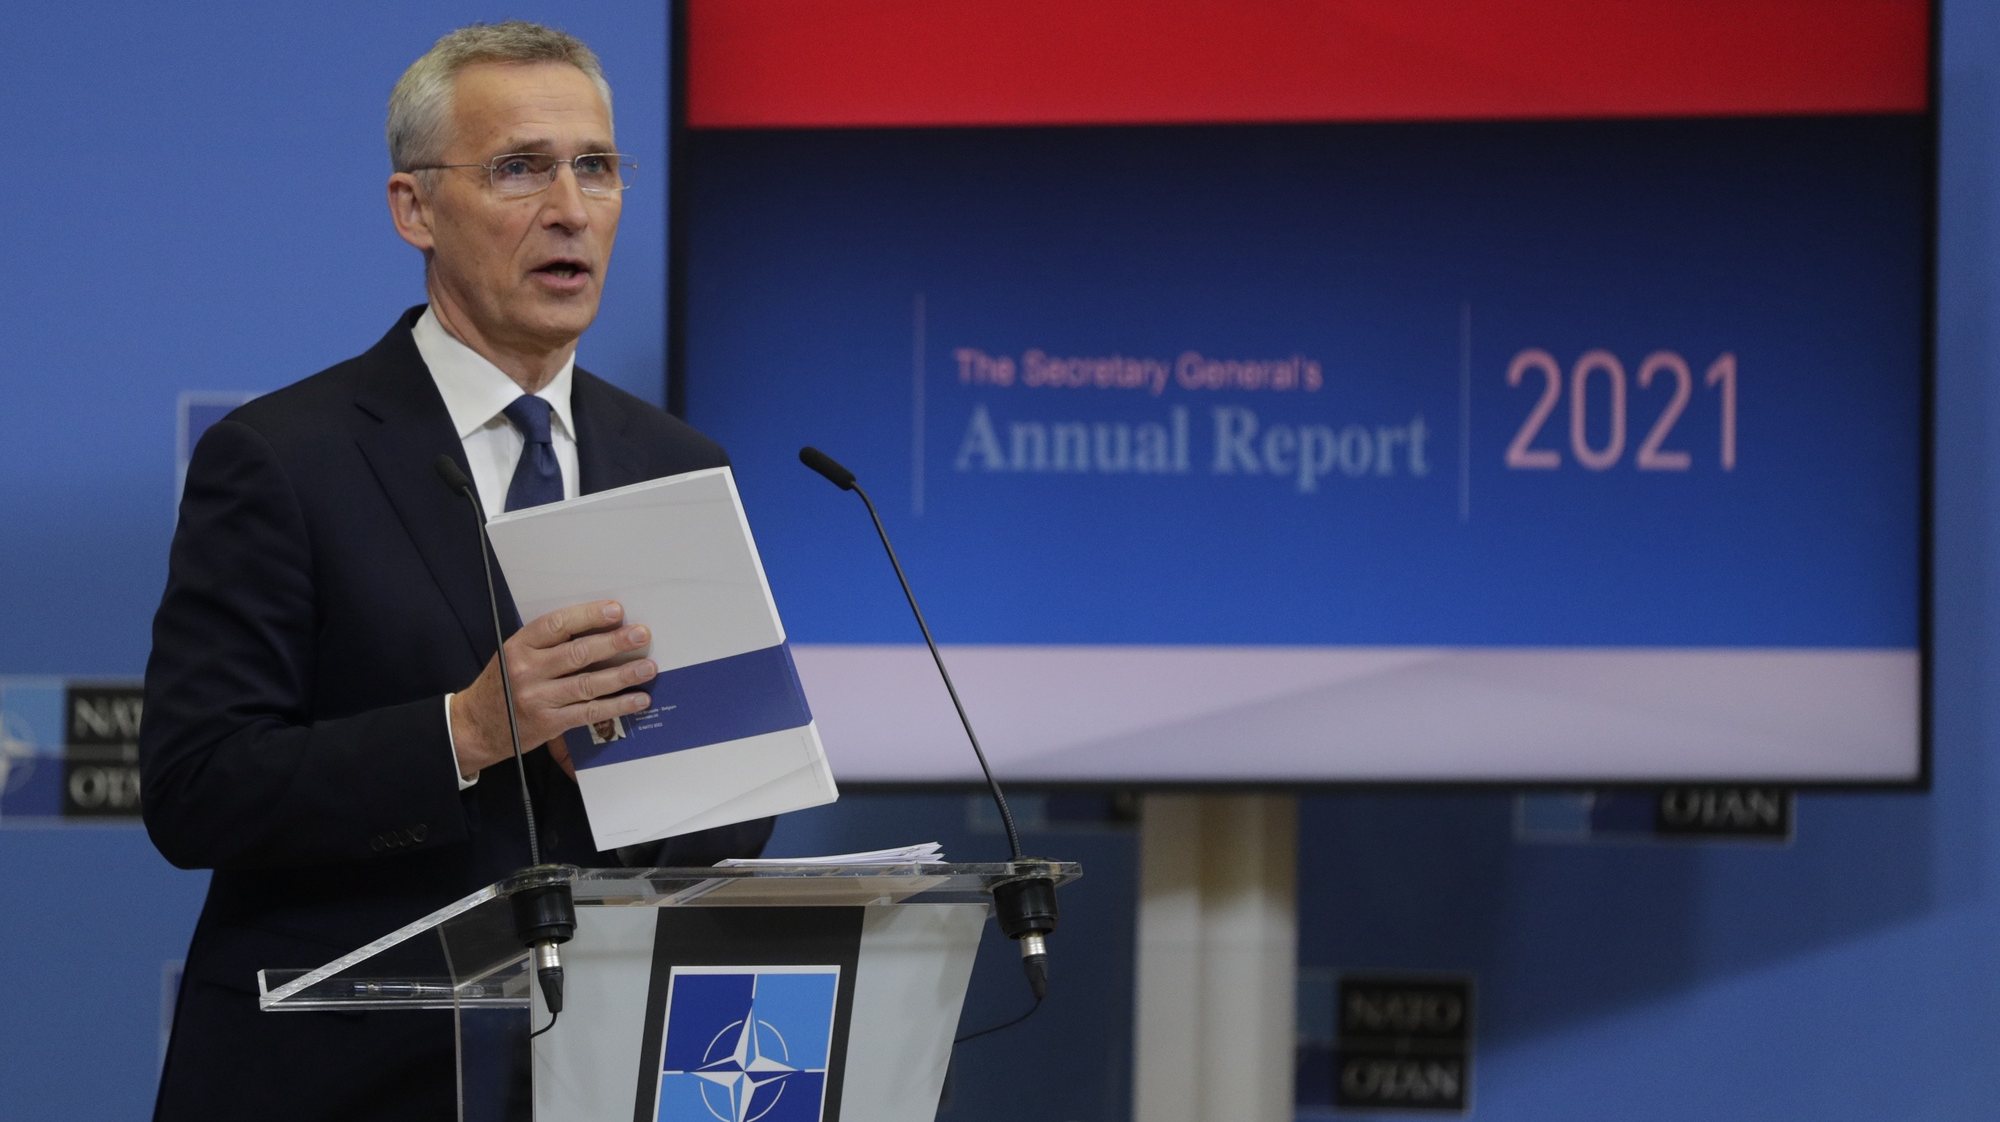 epa09861719 NATO Secretary General Jens Stoltenberg presents the annual report 2021 of the Alliance during a press conference in Brussels, Belgium, 31 March 2022.  EPA/OLIVIER HOSLET